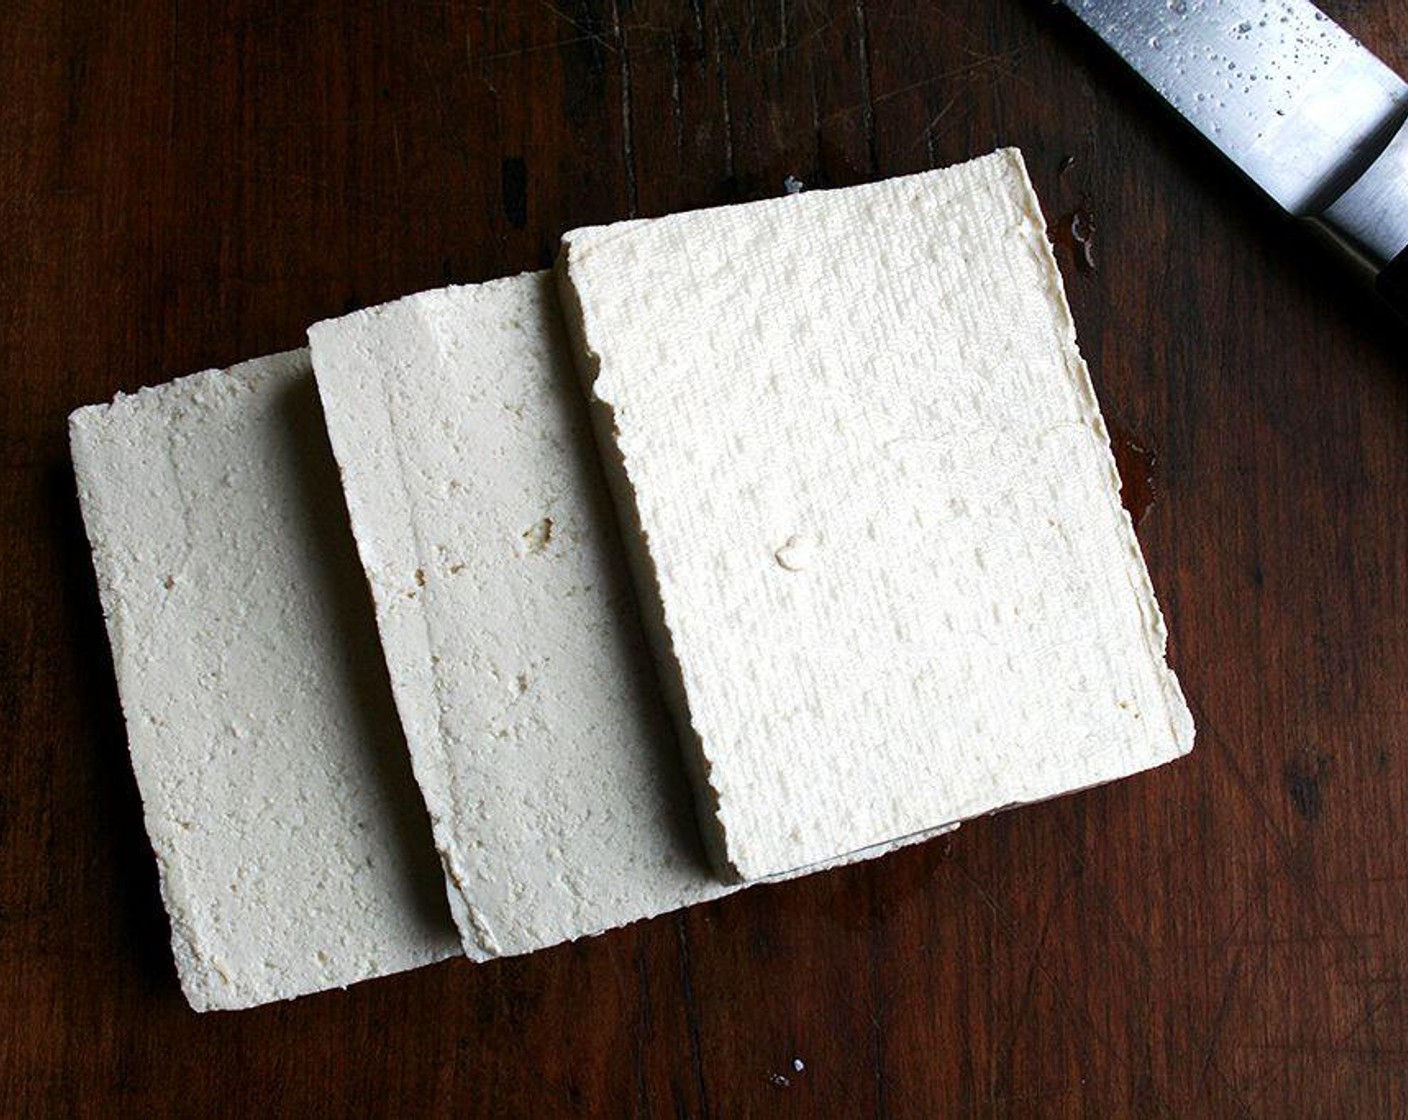 step 5 Carefully cut the drained tofu into three slices. Working with one piece at a time, submerge the tofu into the egg, then coat it in the sesame-panko mix, then place it on a clean plate. Repeat with the remaining two slices.